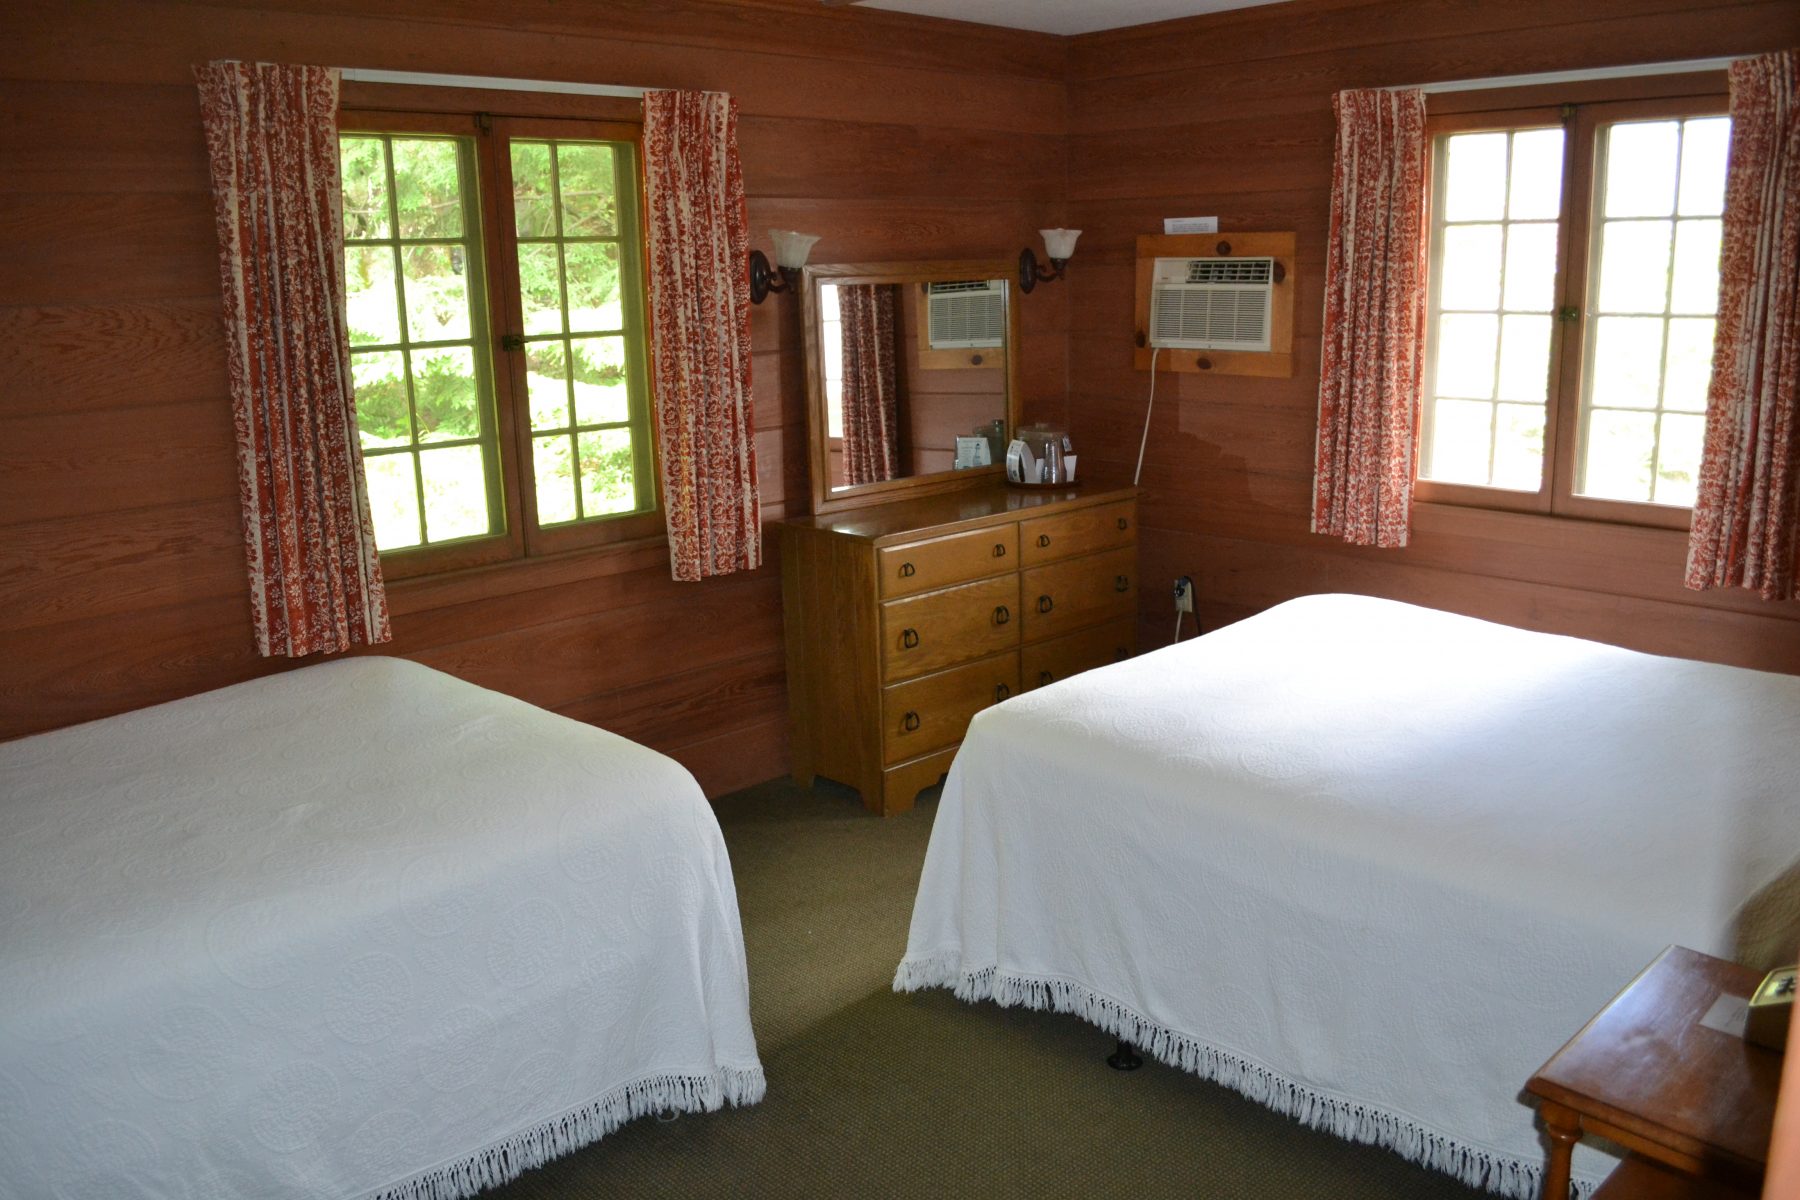 2 beds in Adirondack style room